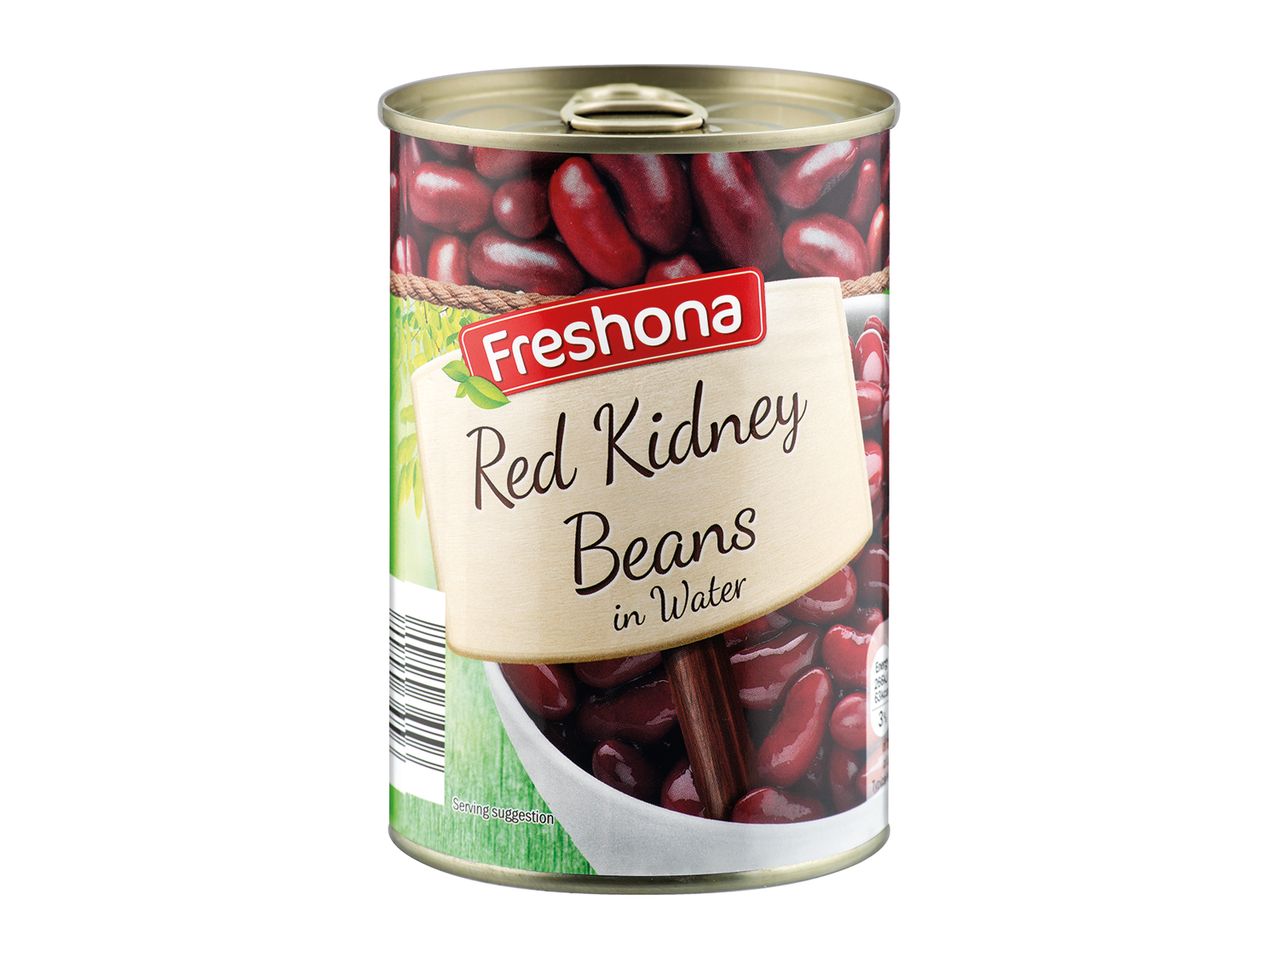 Go to full screen view: Freshona Red Kidney Beans in Water - Image 1